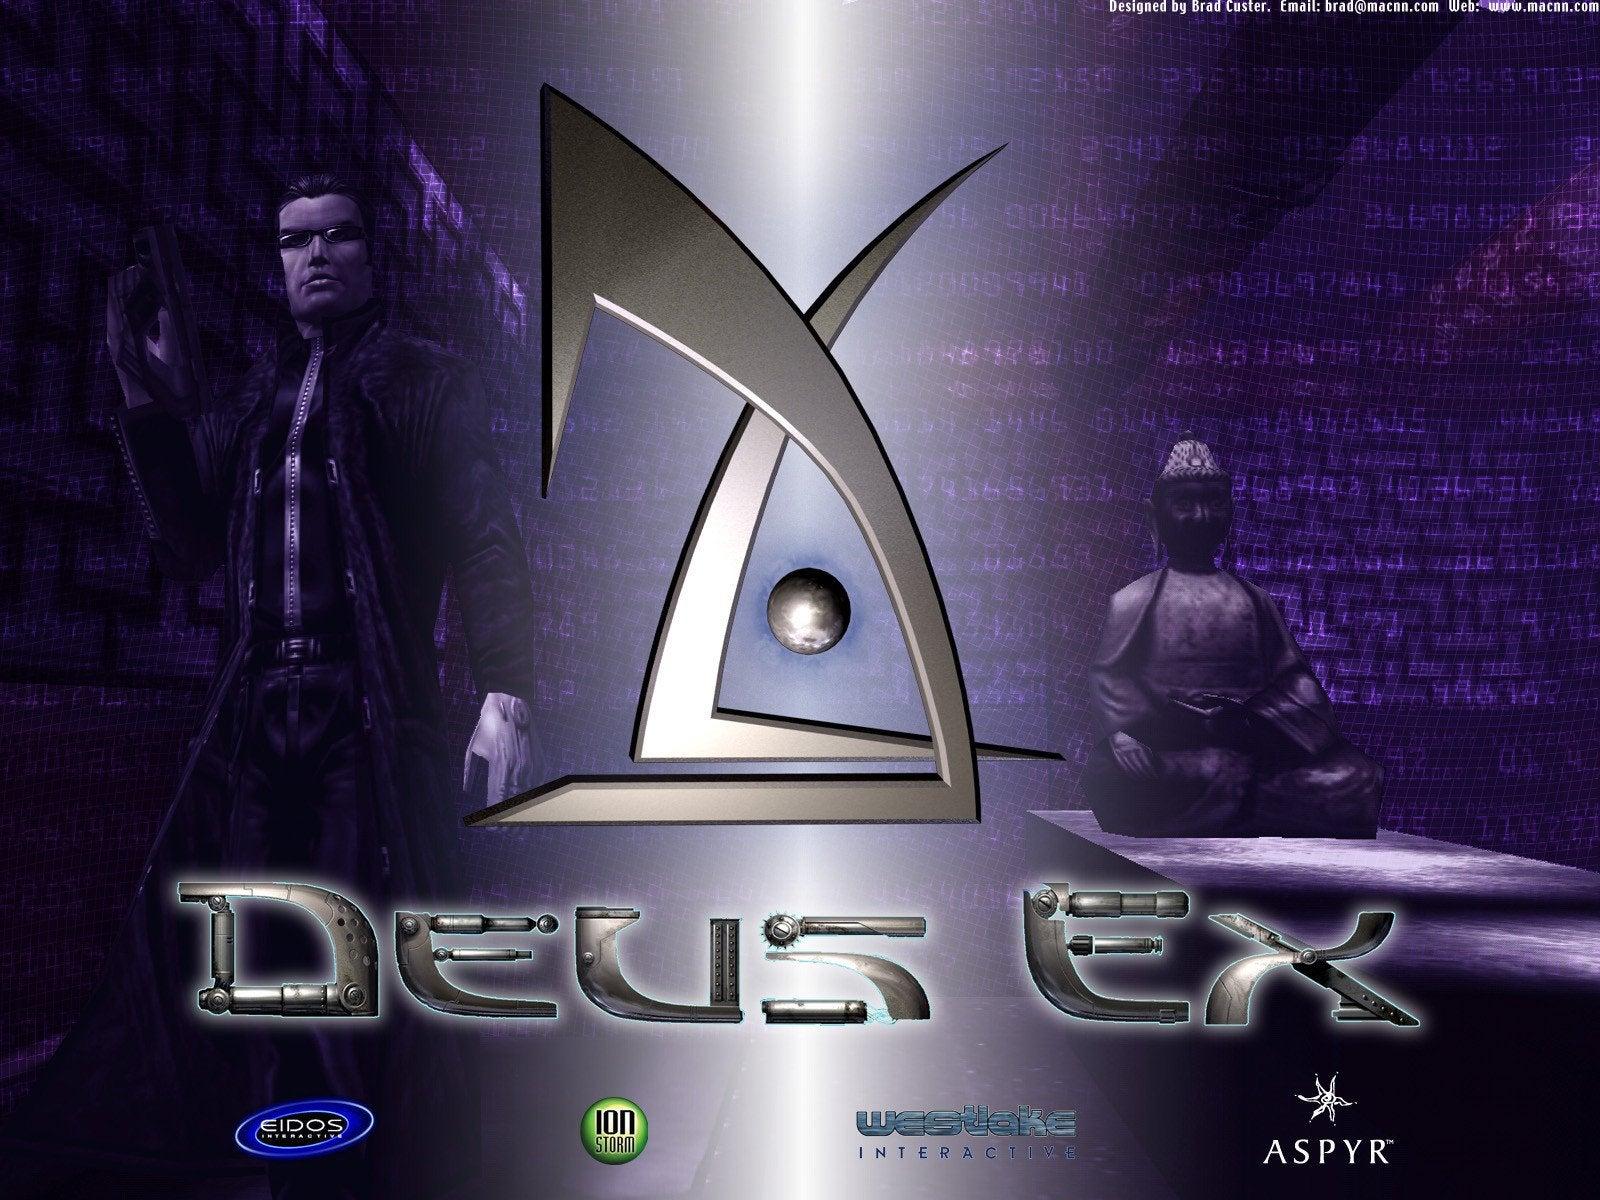 Deus Ex wallpaper from way back in the early 2000's